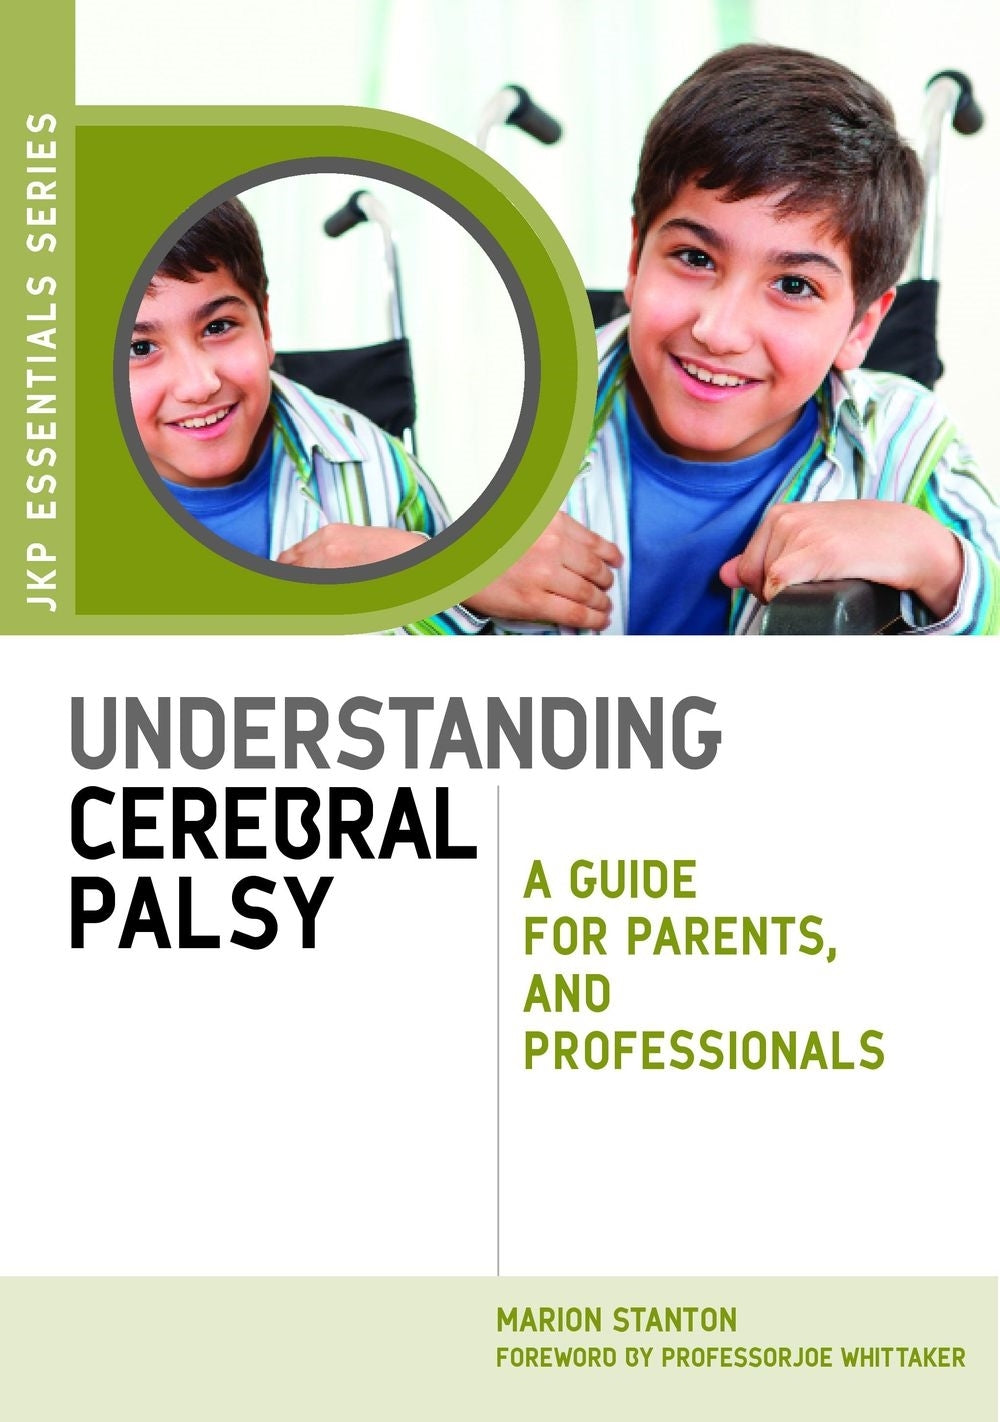 Understanding Cerebral Palsy by Marion Stanton